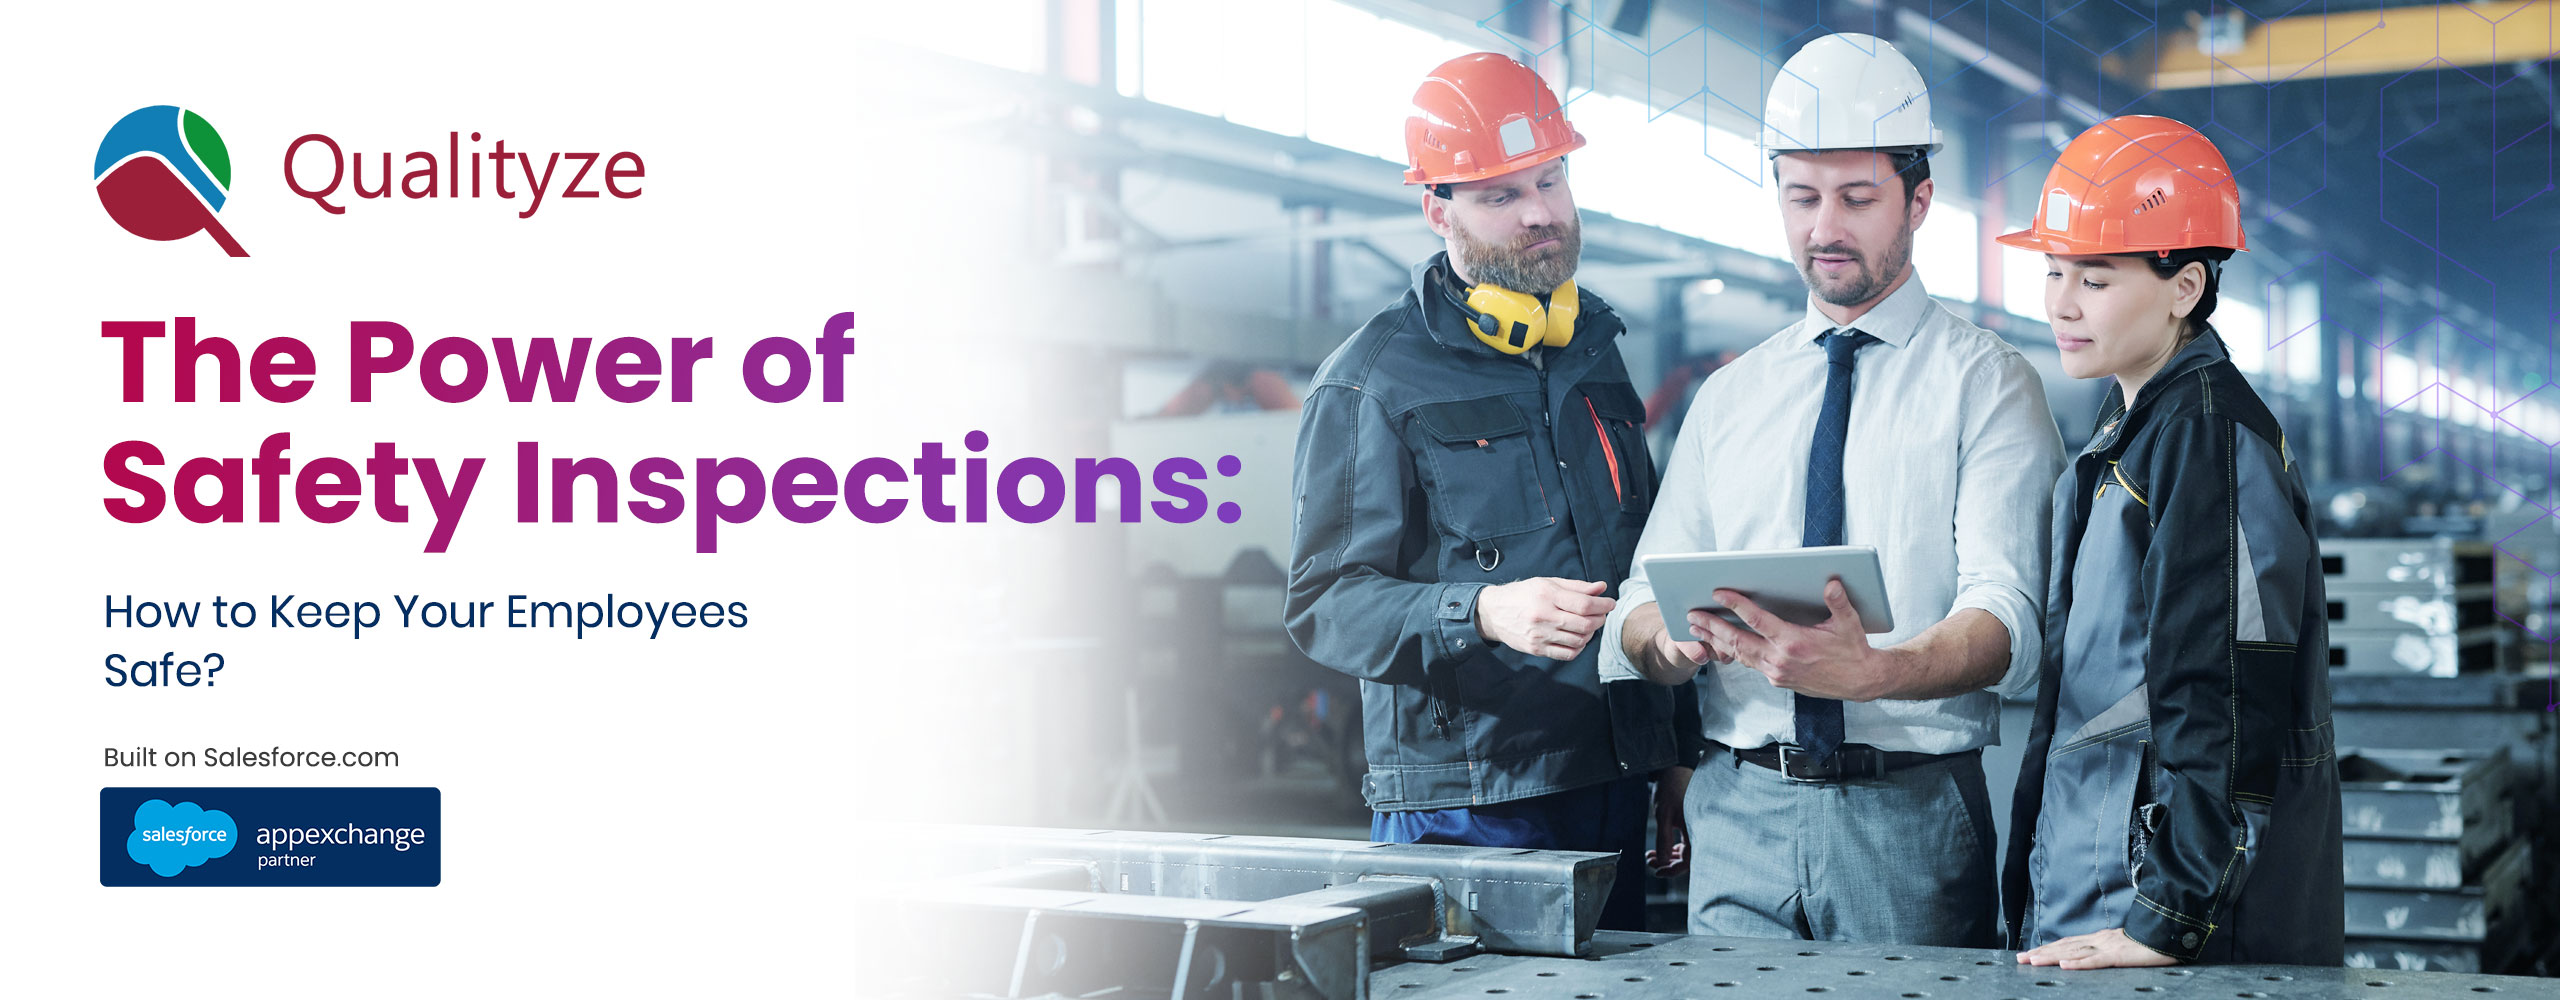 The Power of Safety Inspections: How to Keep Your Employees Safe